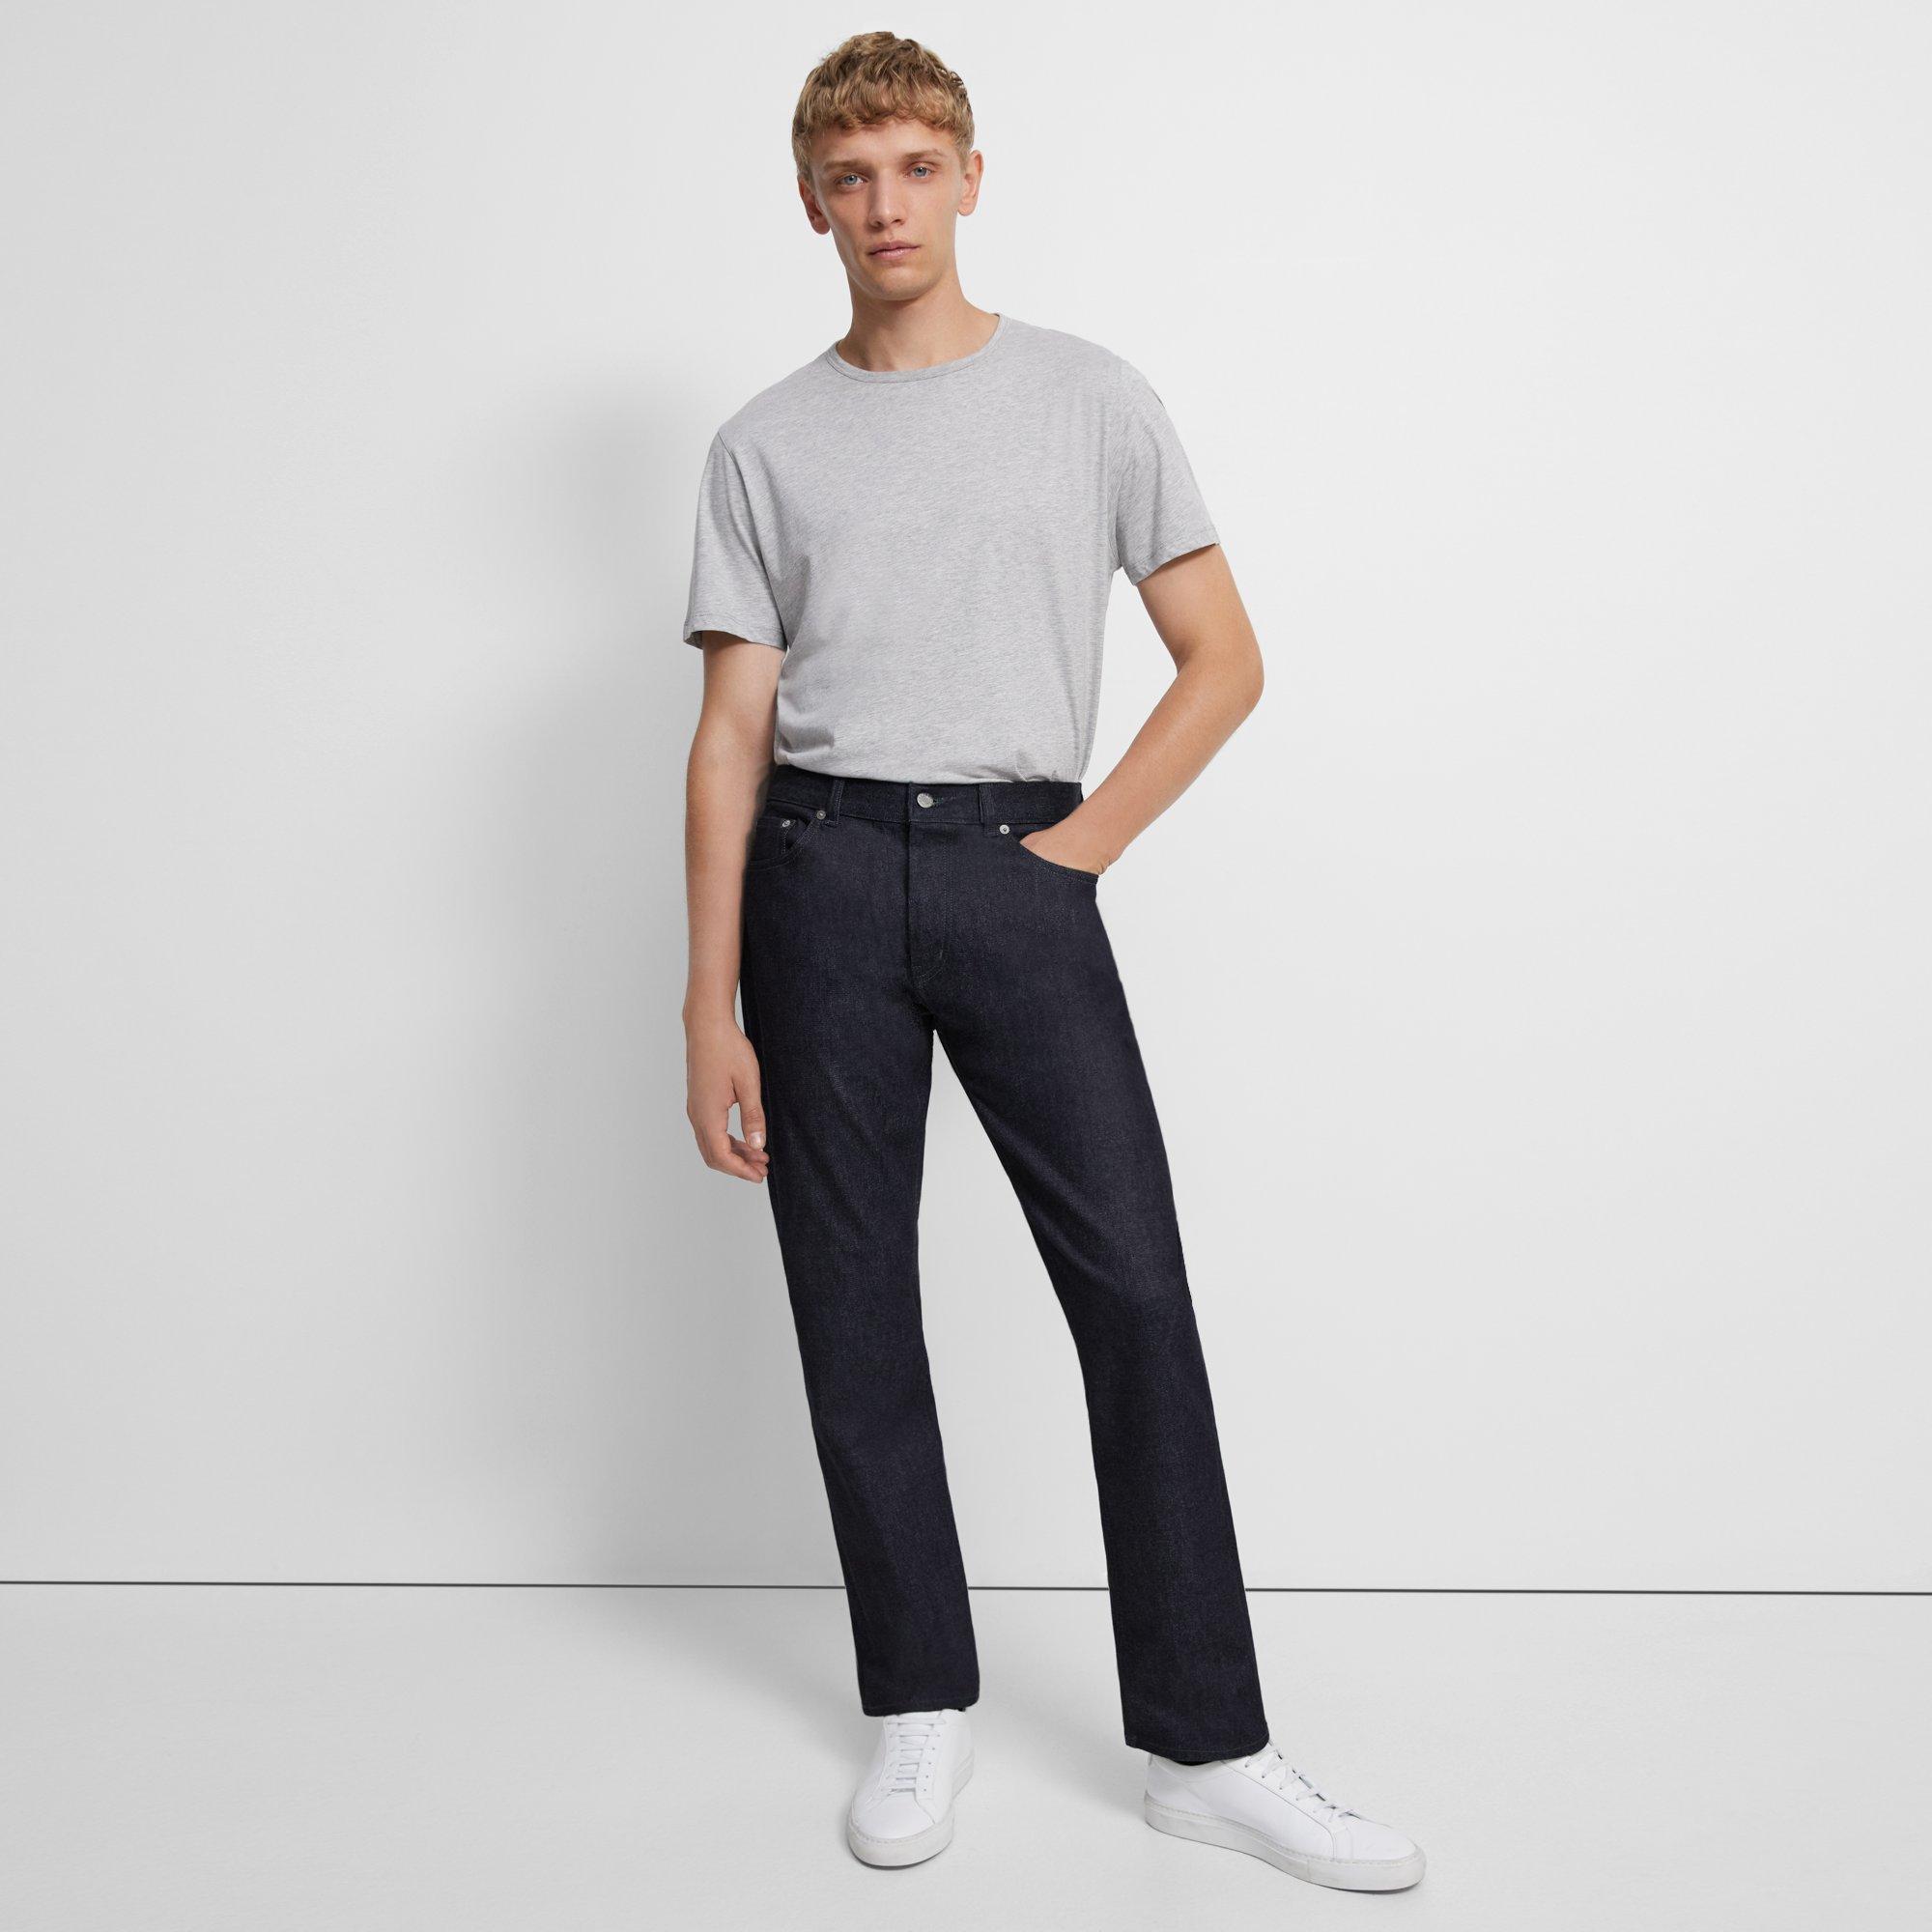 Theory Helmut Lang And Uniqlo Classic Cut Jean In Denim In Indigo